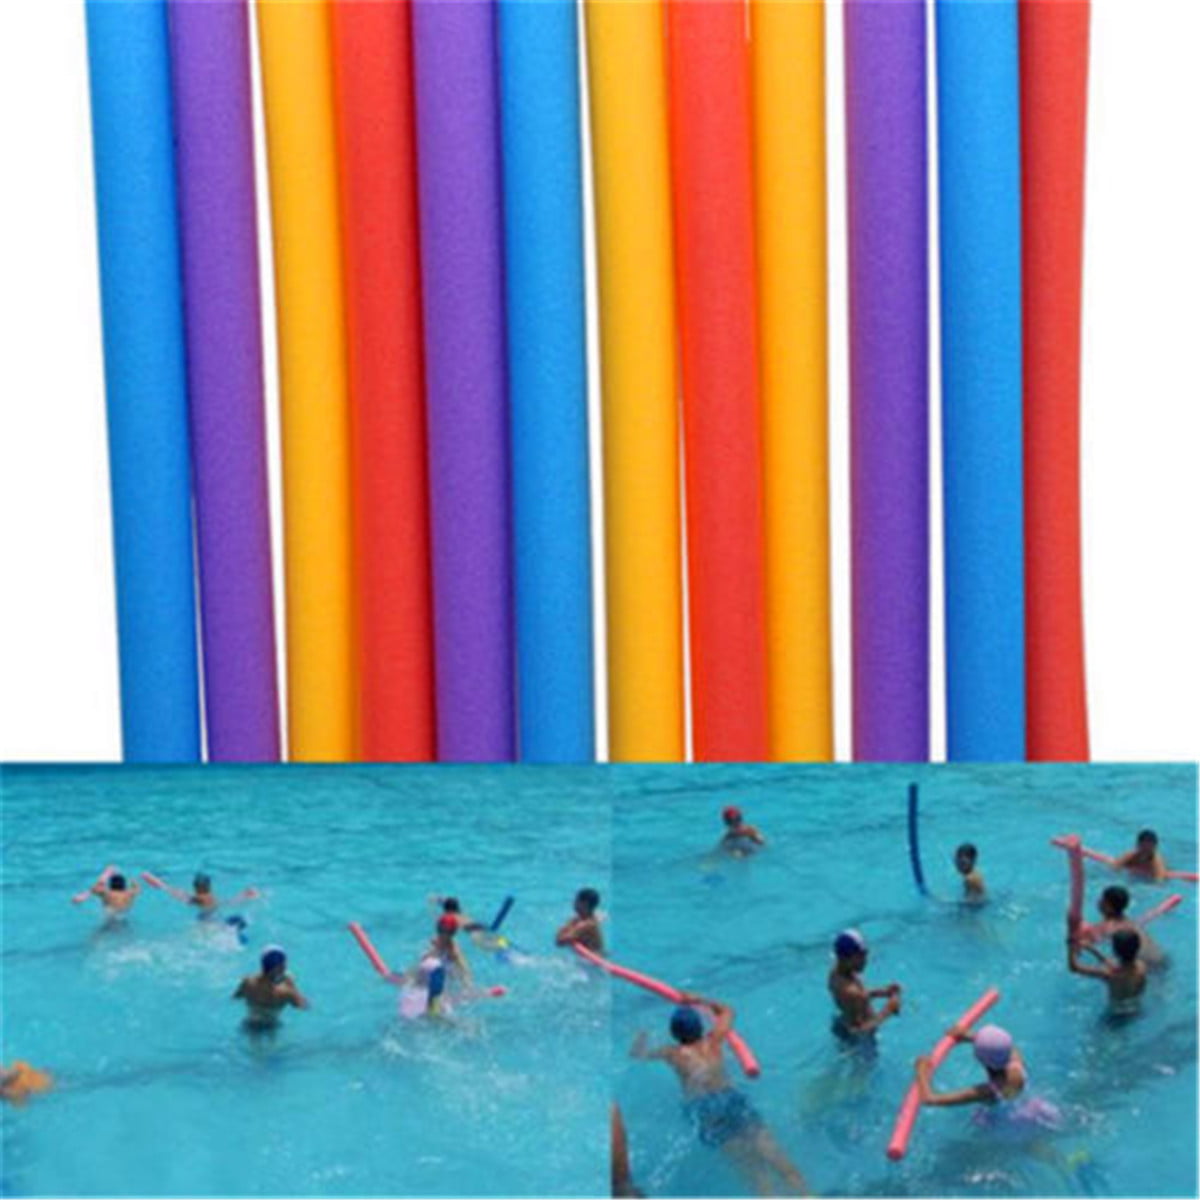 Lot 8 x Noodle Swimming Pool Noodle Therapy Water Floating Foam Random Colors. 